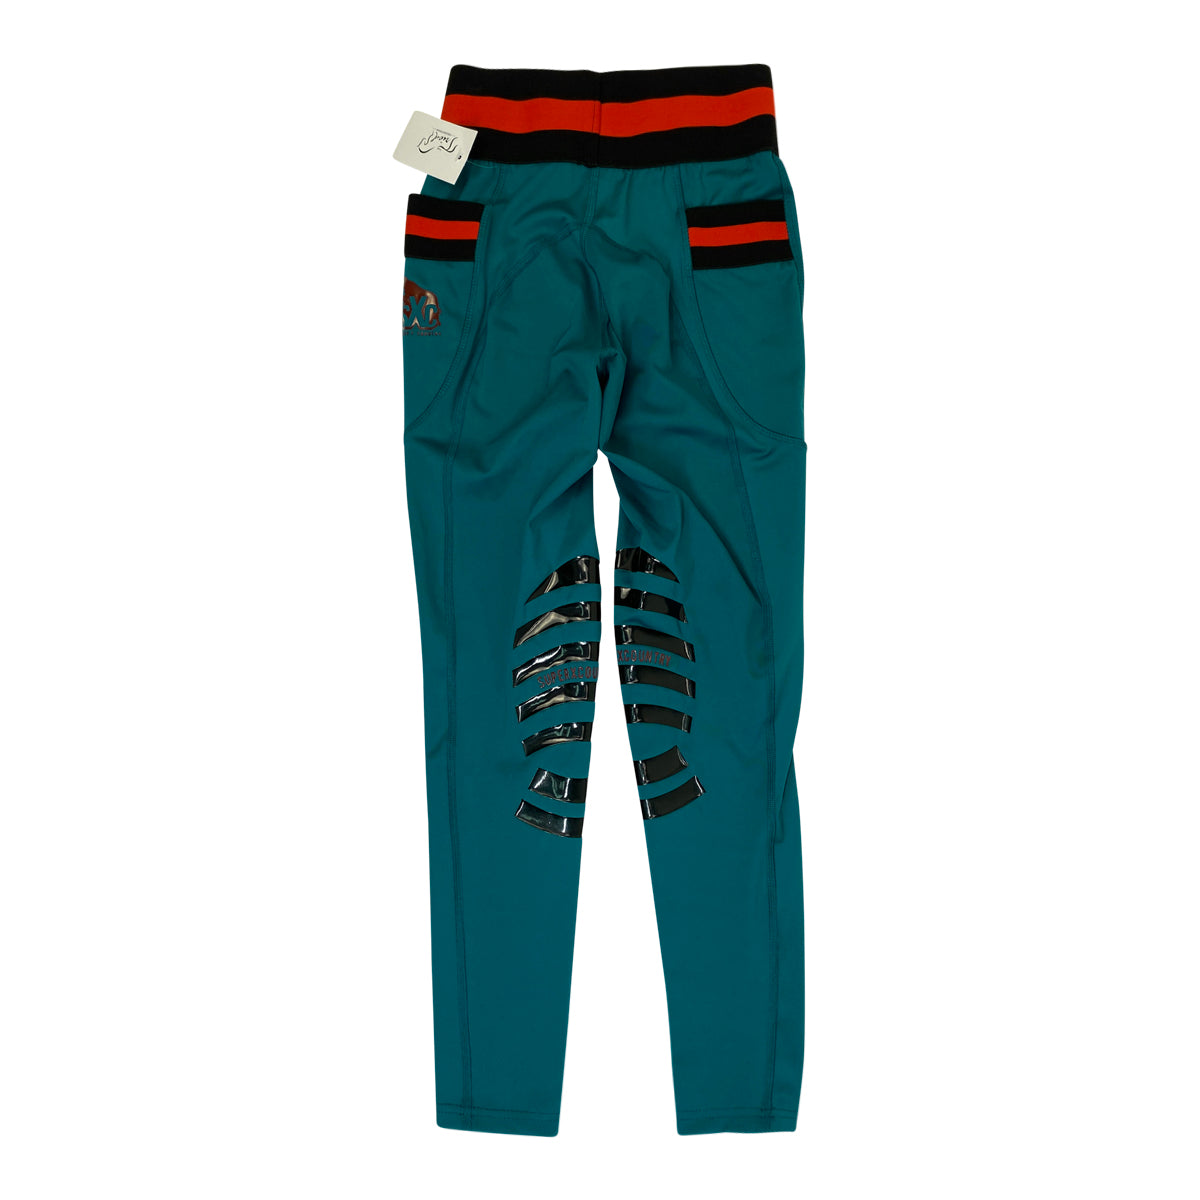 SXC Riding Tights in Teal/Black &amp; Red